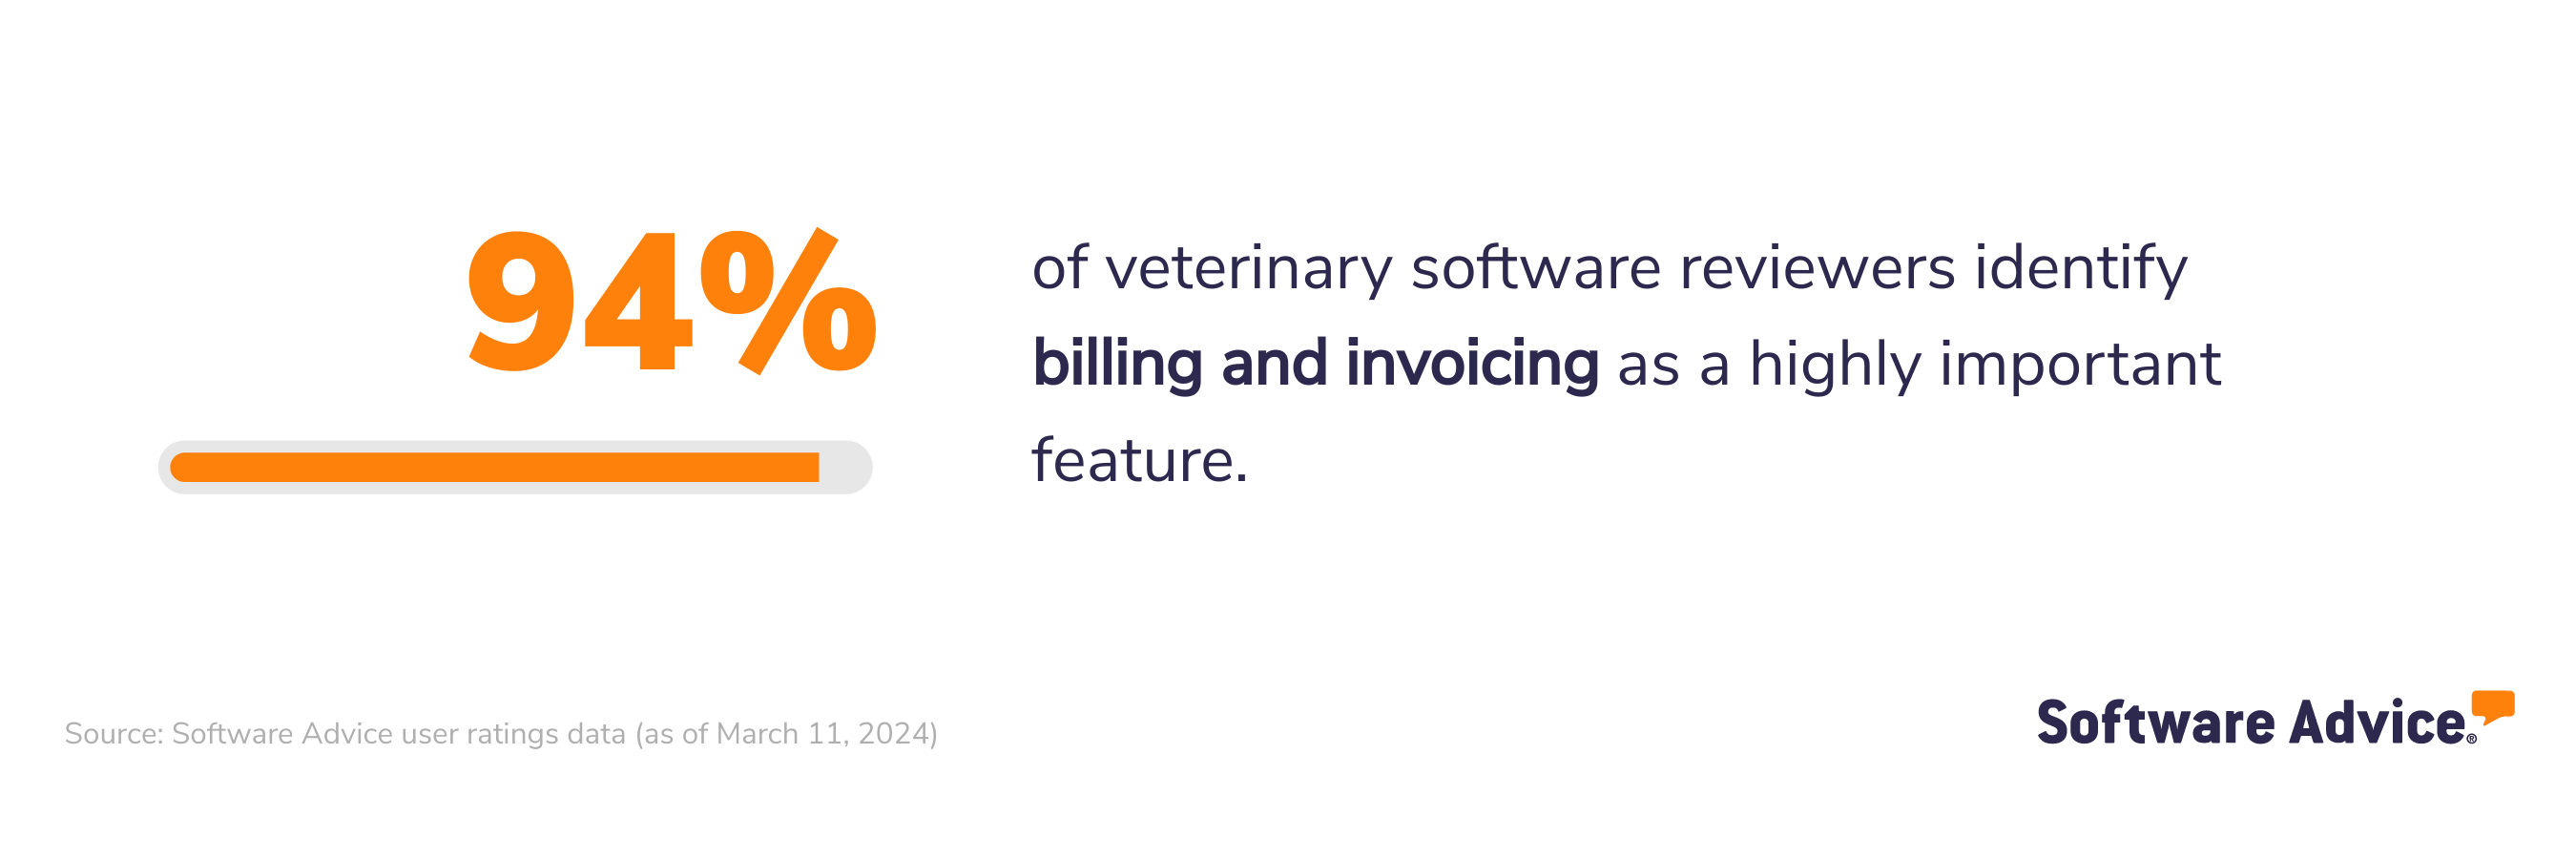 94% of veterinary software reviewers identify billing and invoicing as a highly important feature.